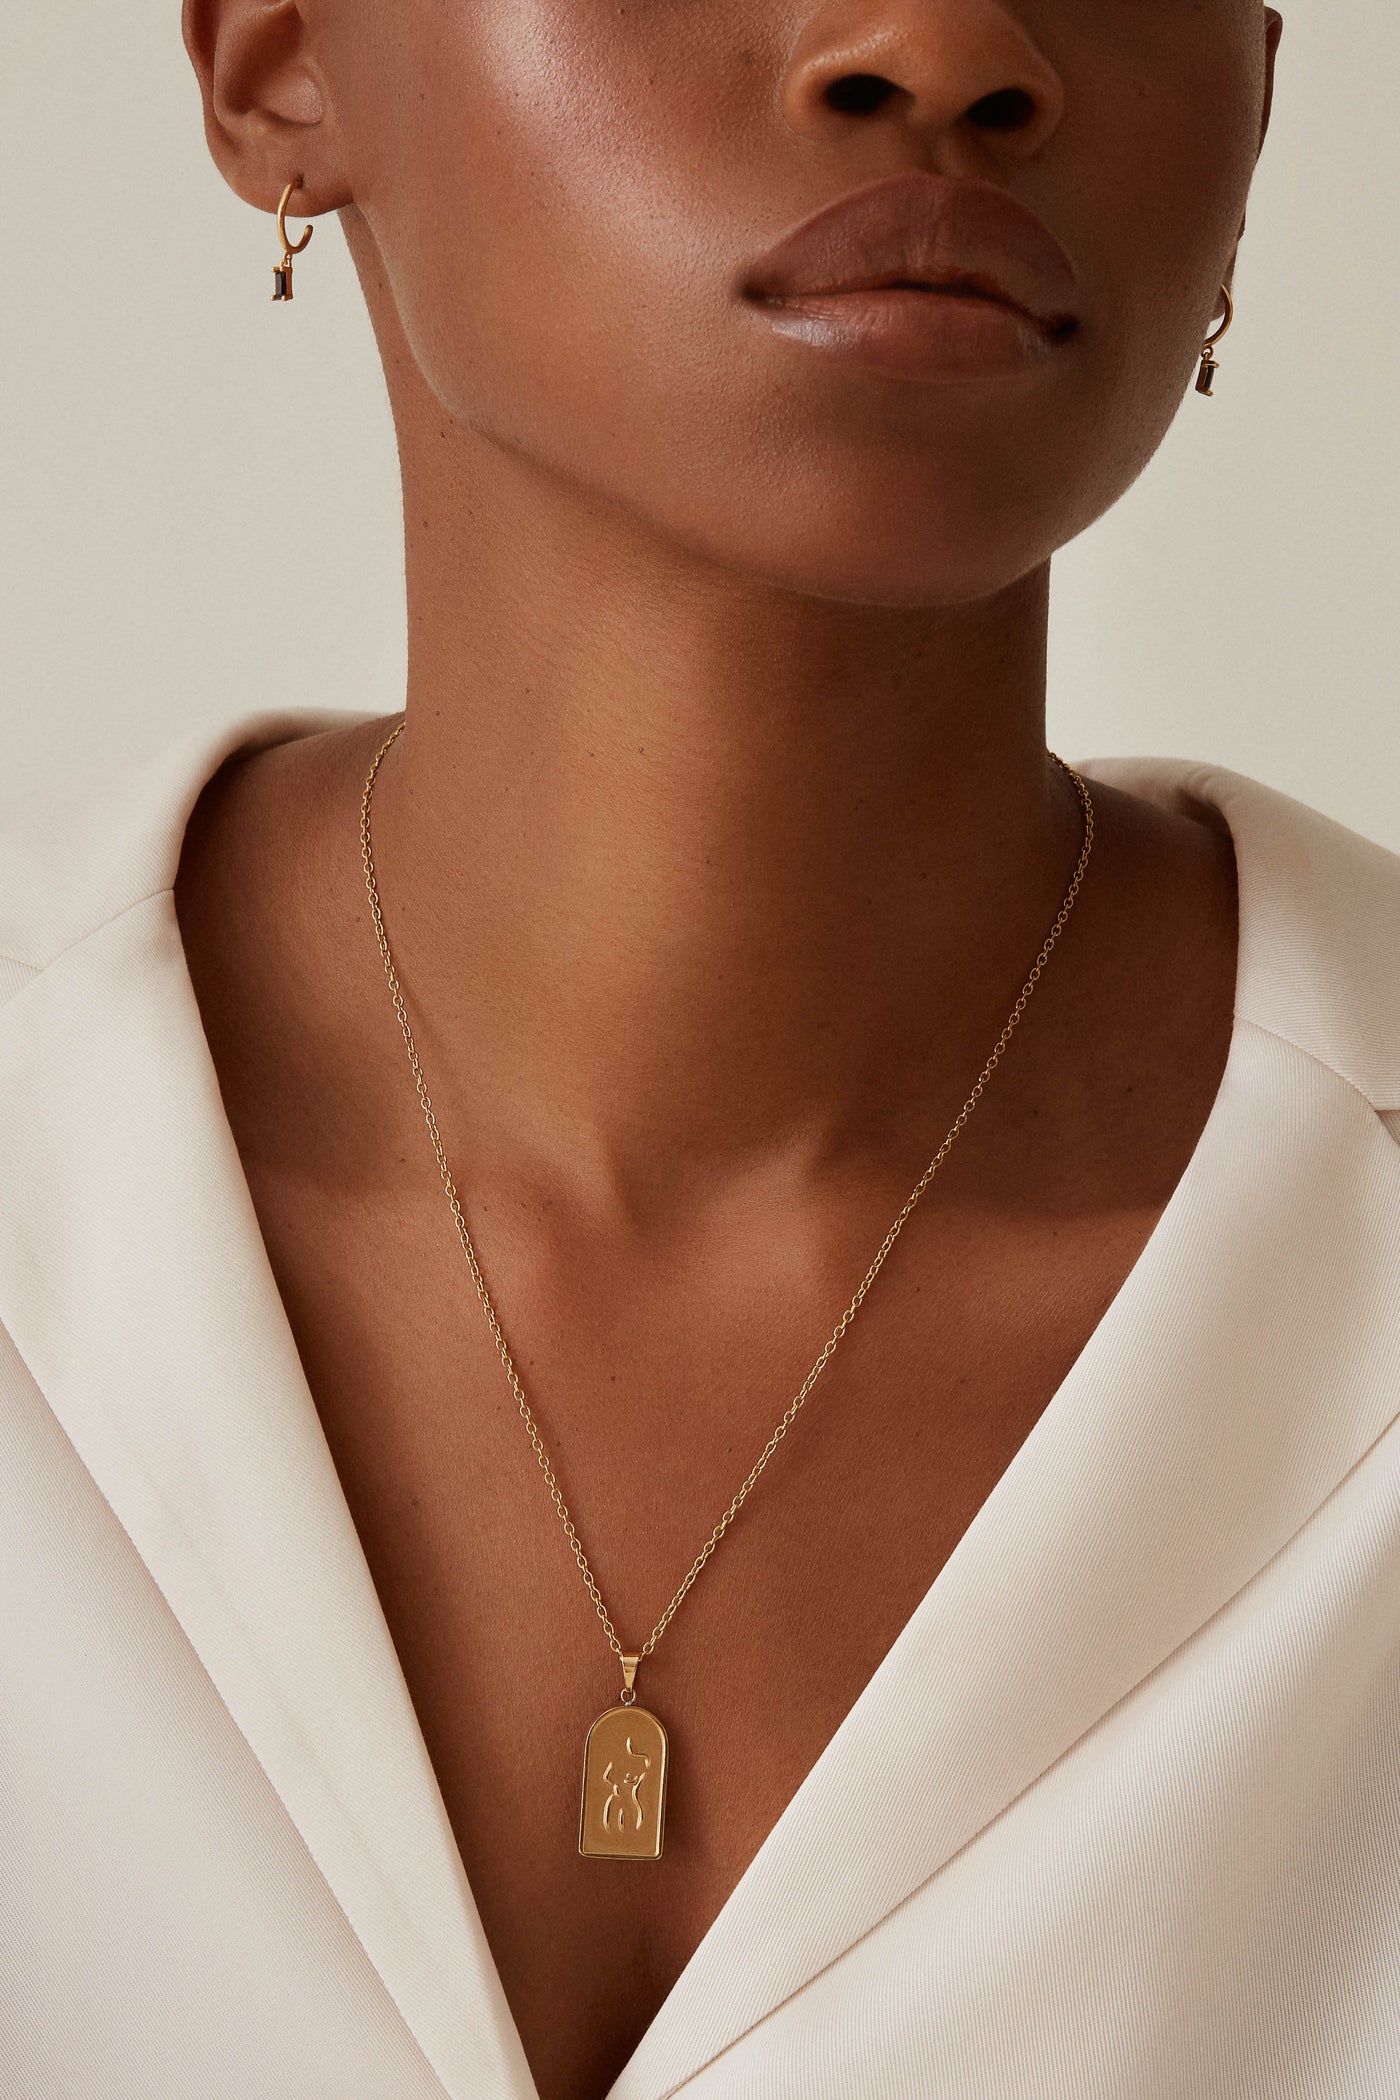 Collier Femme - Or